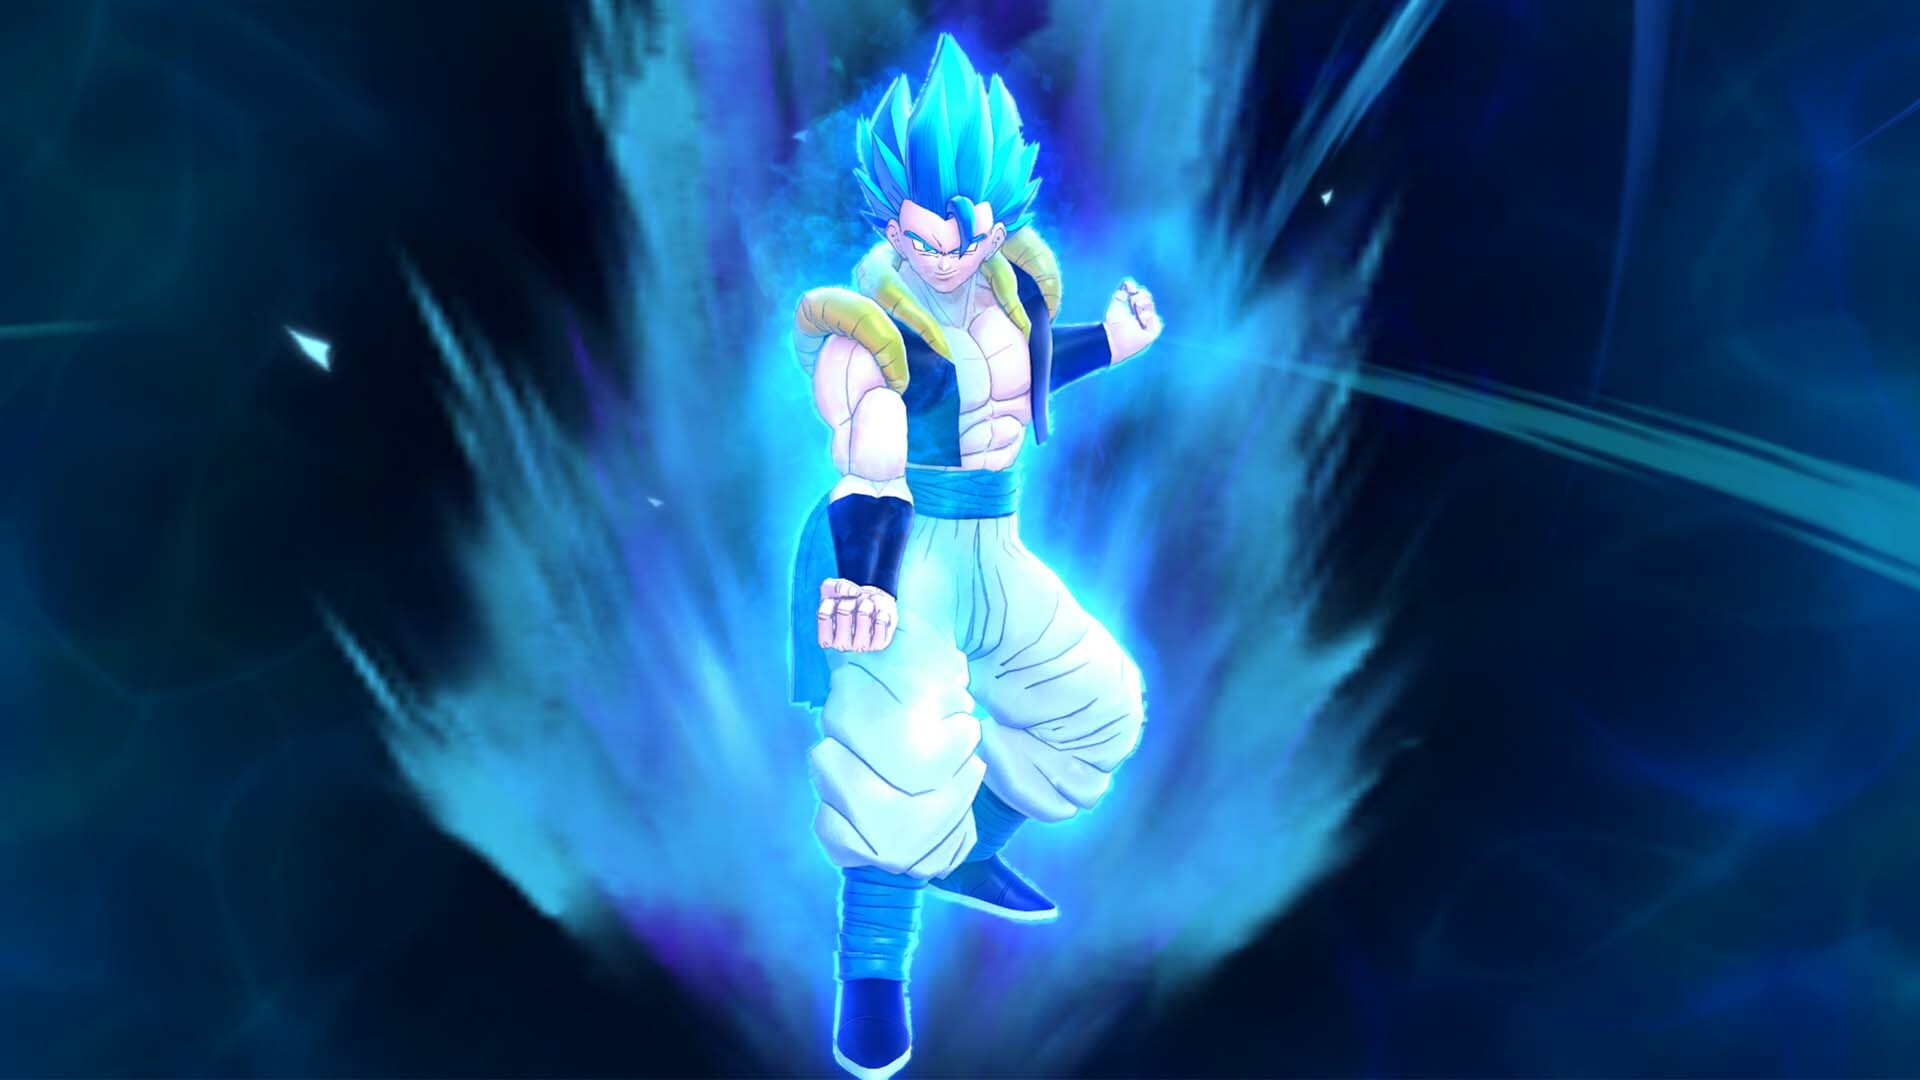 FREE DRAGON BALL: The Breakers Open Beta Test on Steam